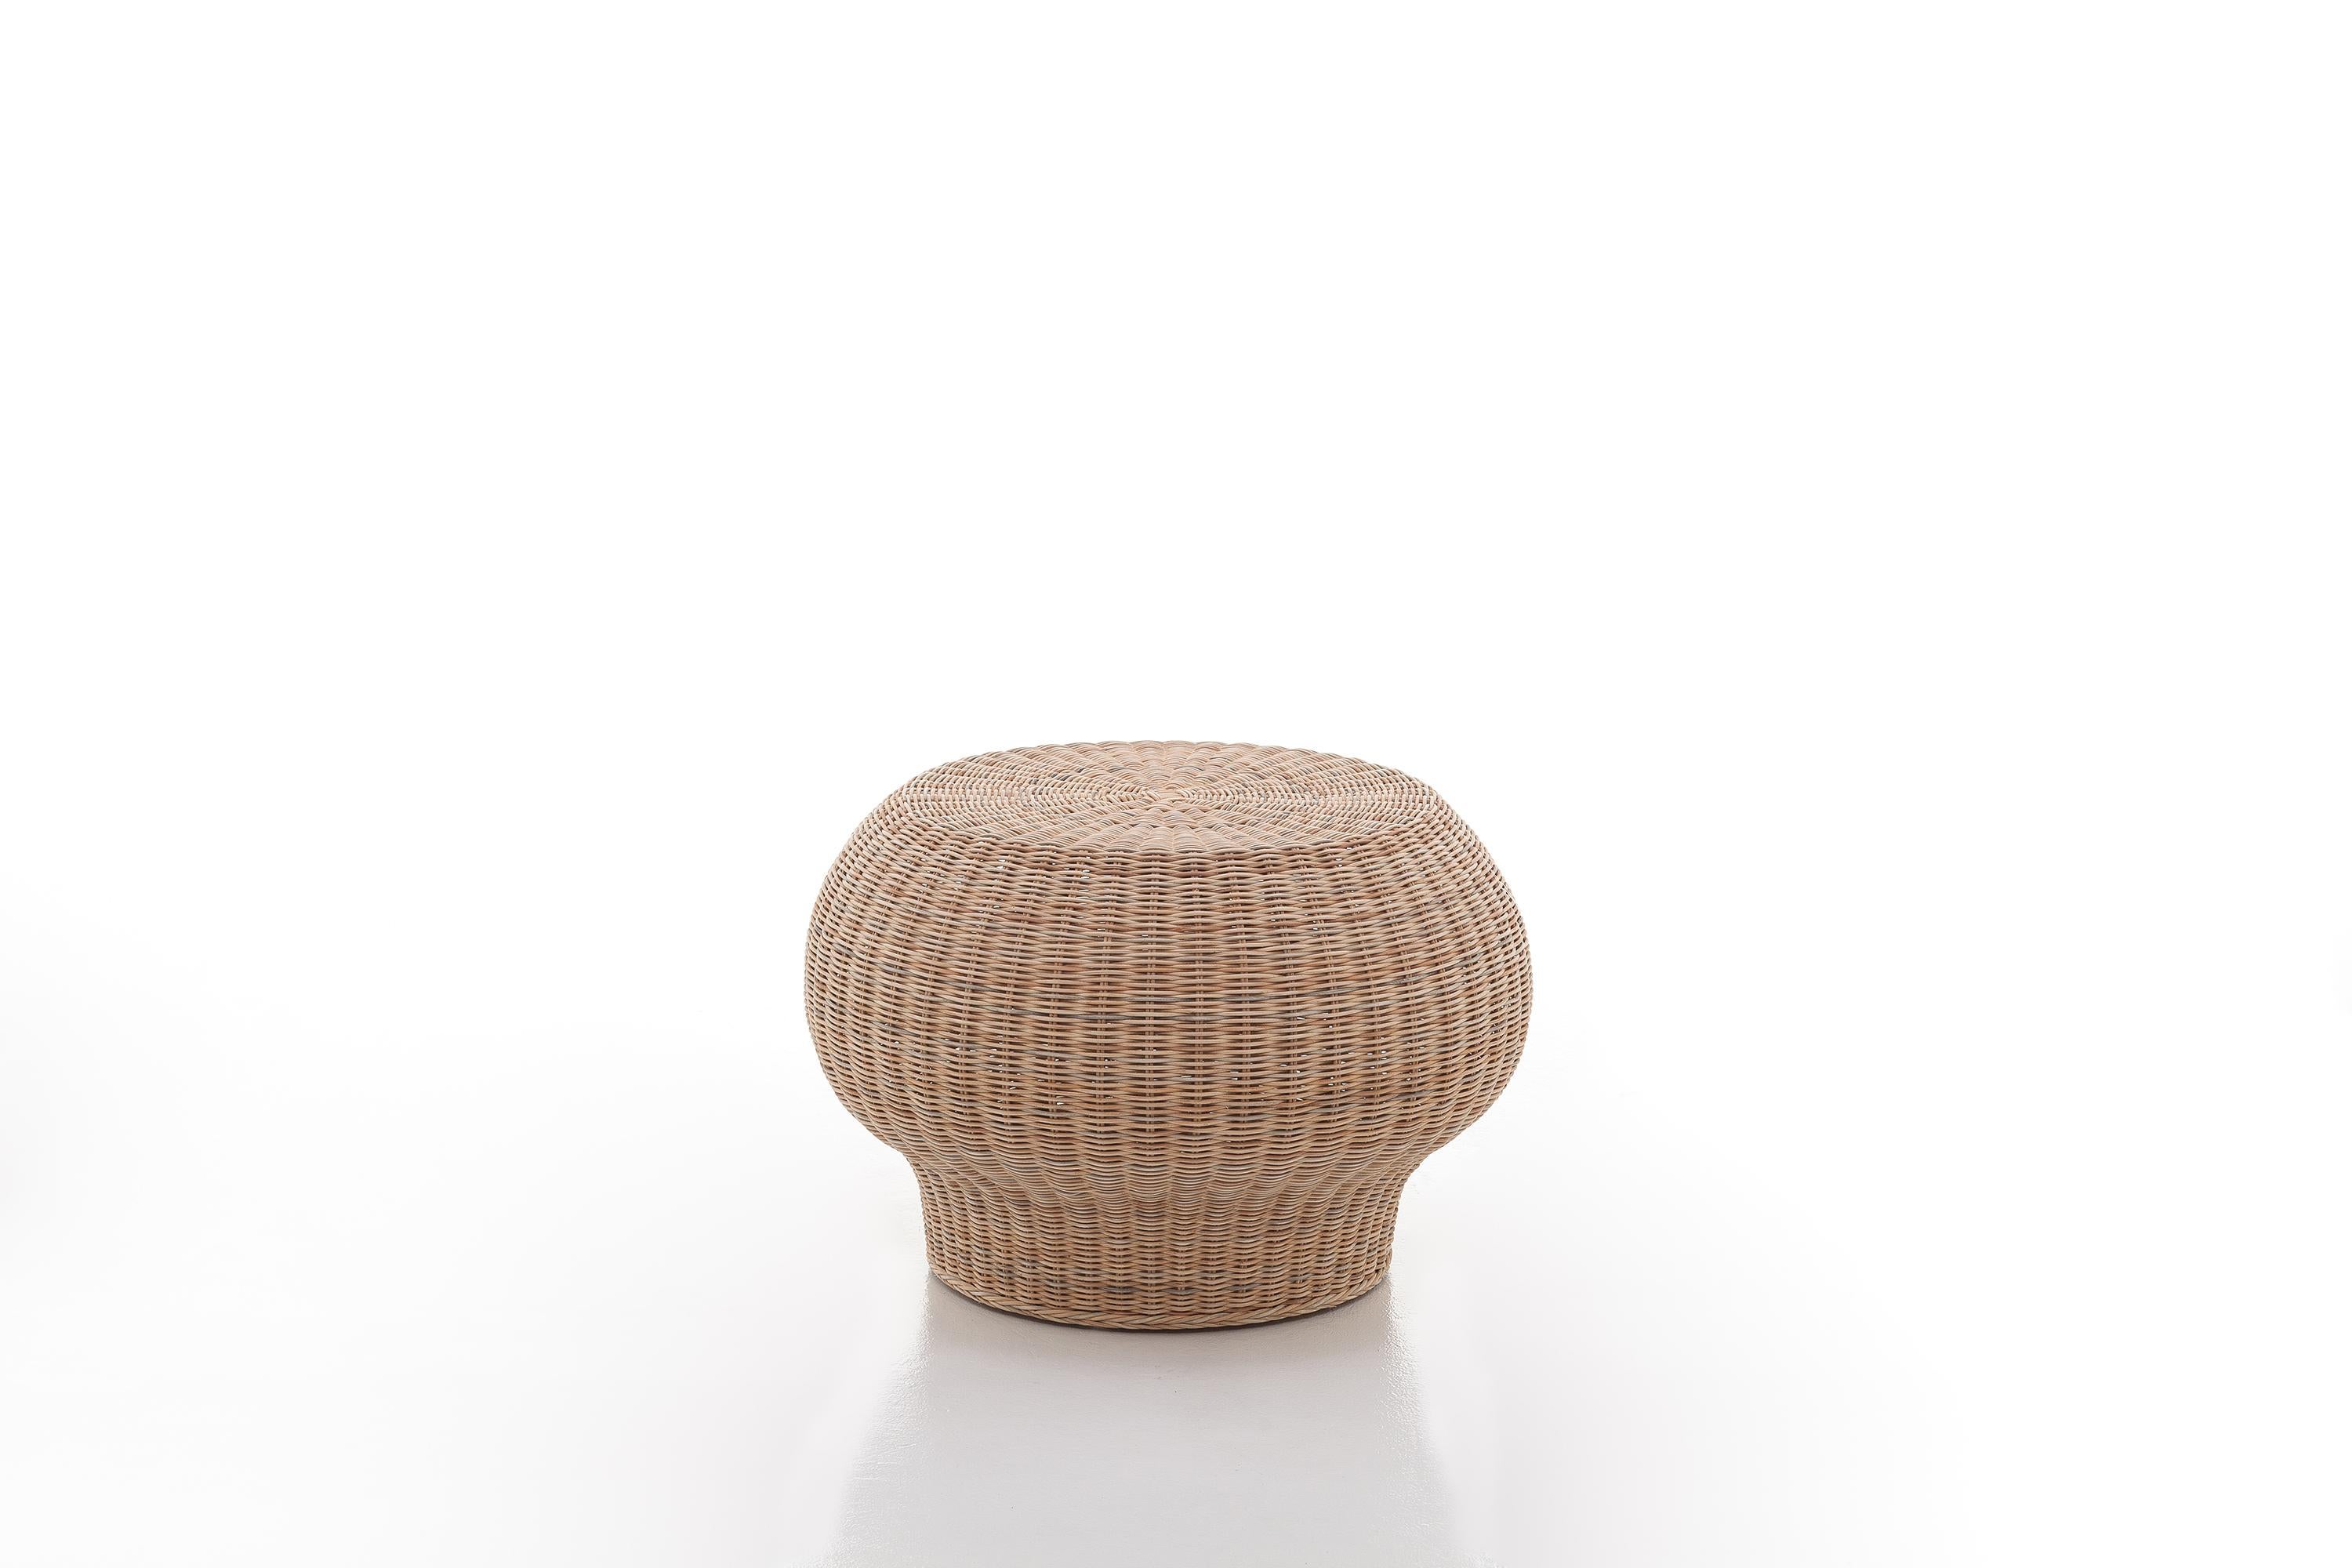 Family of small pouf-tables made entirely of natural mélange woven wicker or lacquered in matt white, grey, black, ocean or dove-grey, characterised by a low and rounded shape with full volumes and a skilful play of workmanship, shapes and colours.